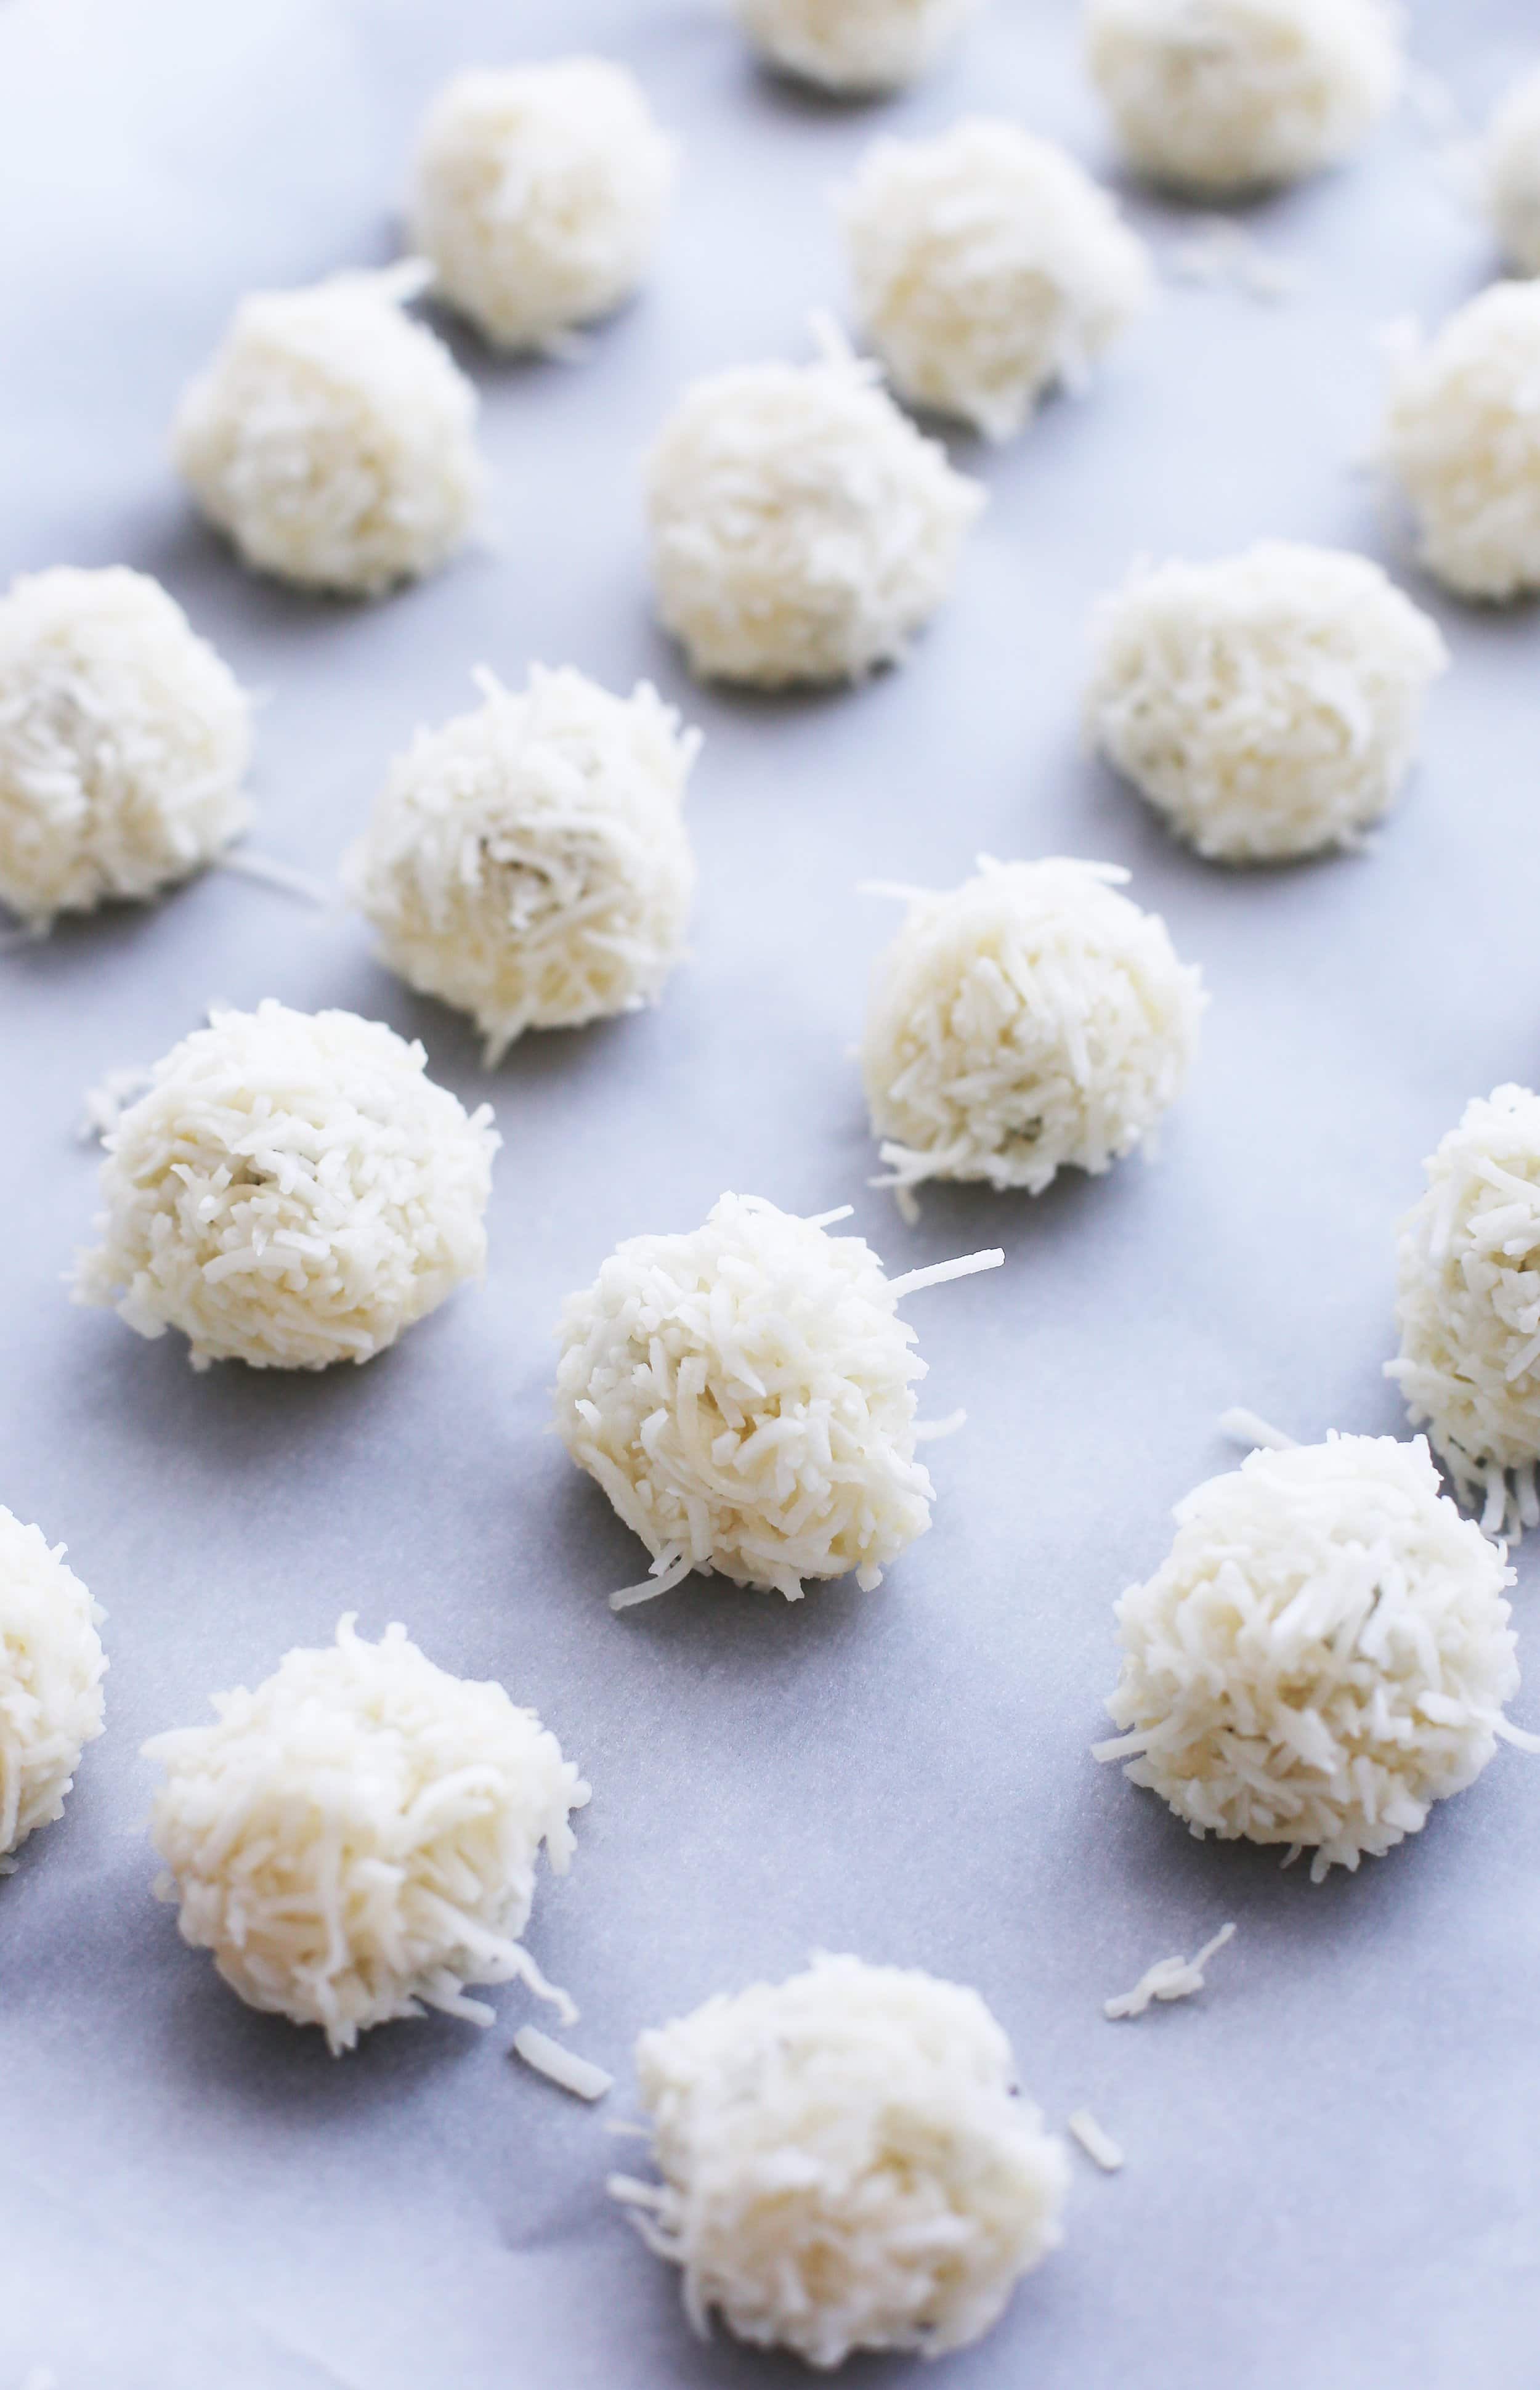 Unbaked peppermint coconut macaroons on a parchment paper-lined baking sheet.